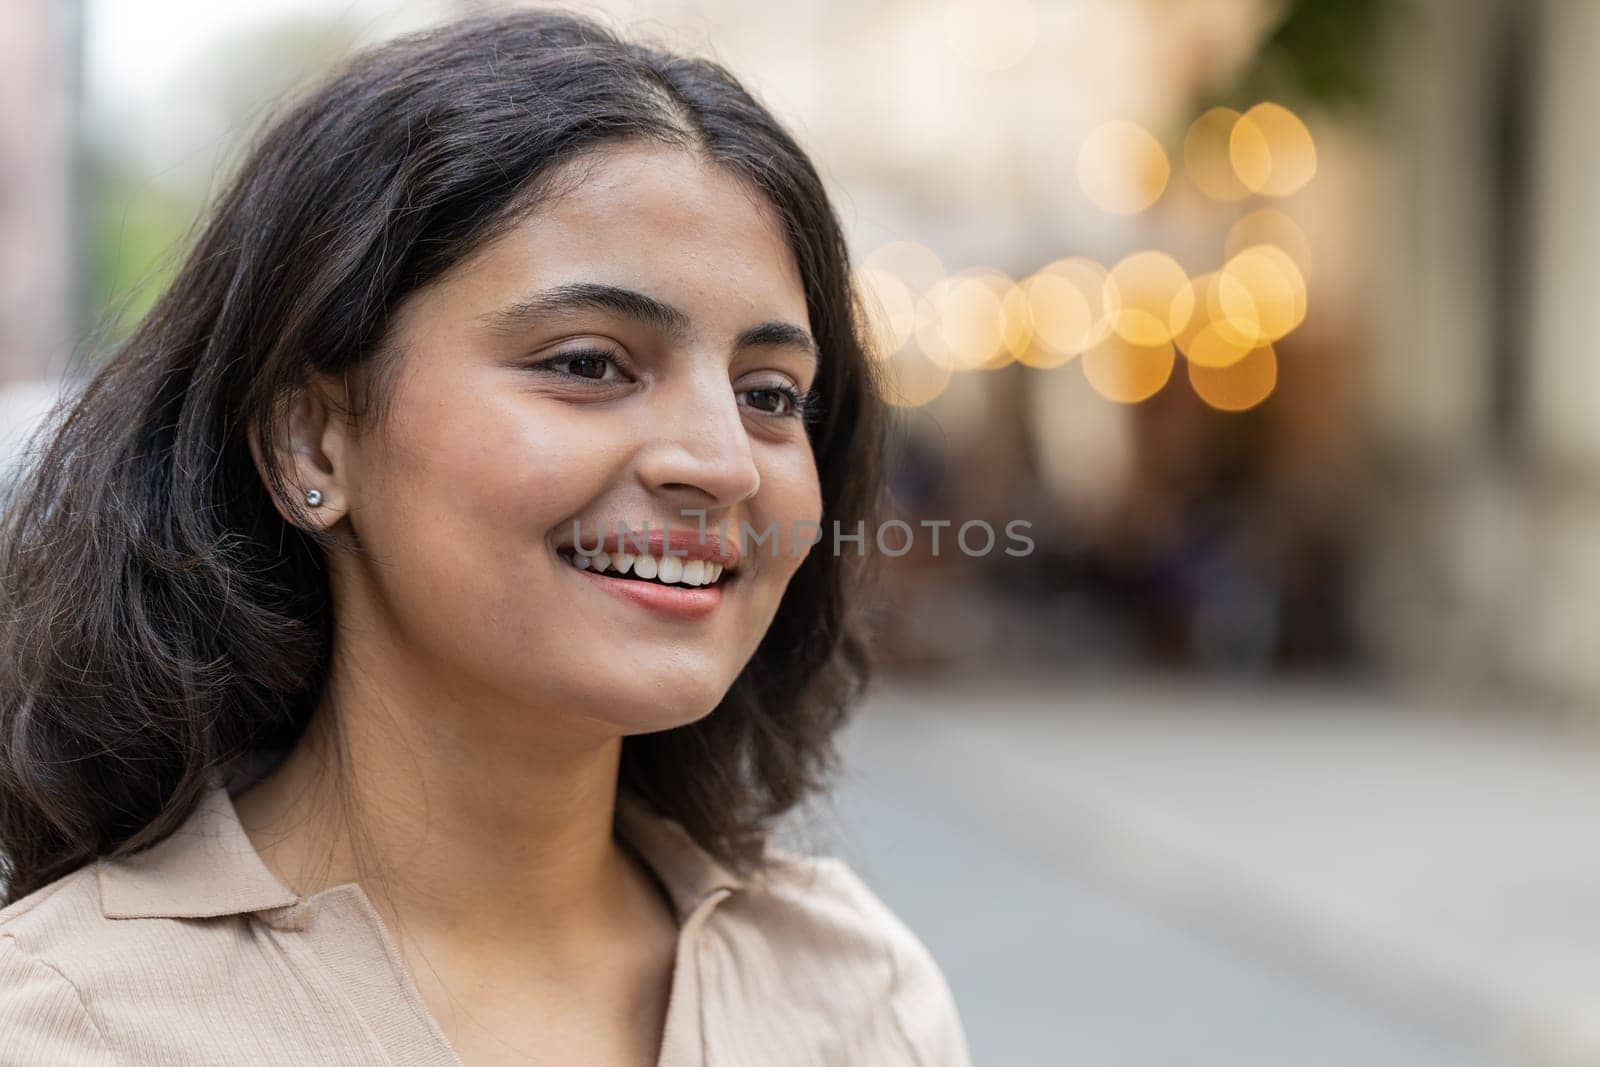 Close-up portrait of happy young Indian woman face smiling friendly open eyes glad expression looking away dreaming resting relaxation feel satisfied good news outdoors. Pretty girl on city street